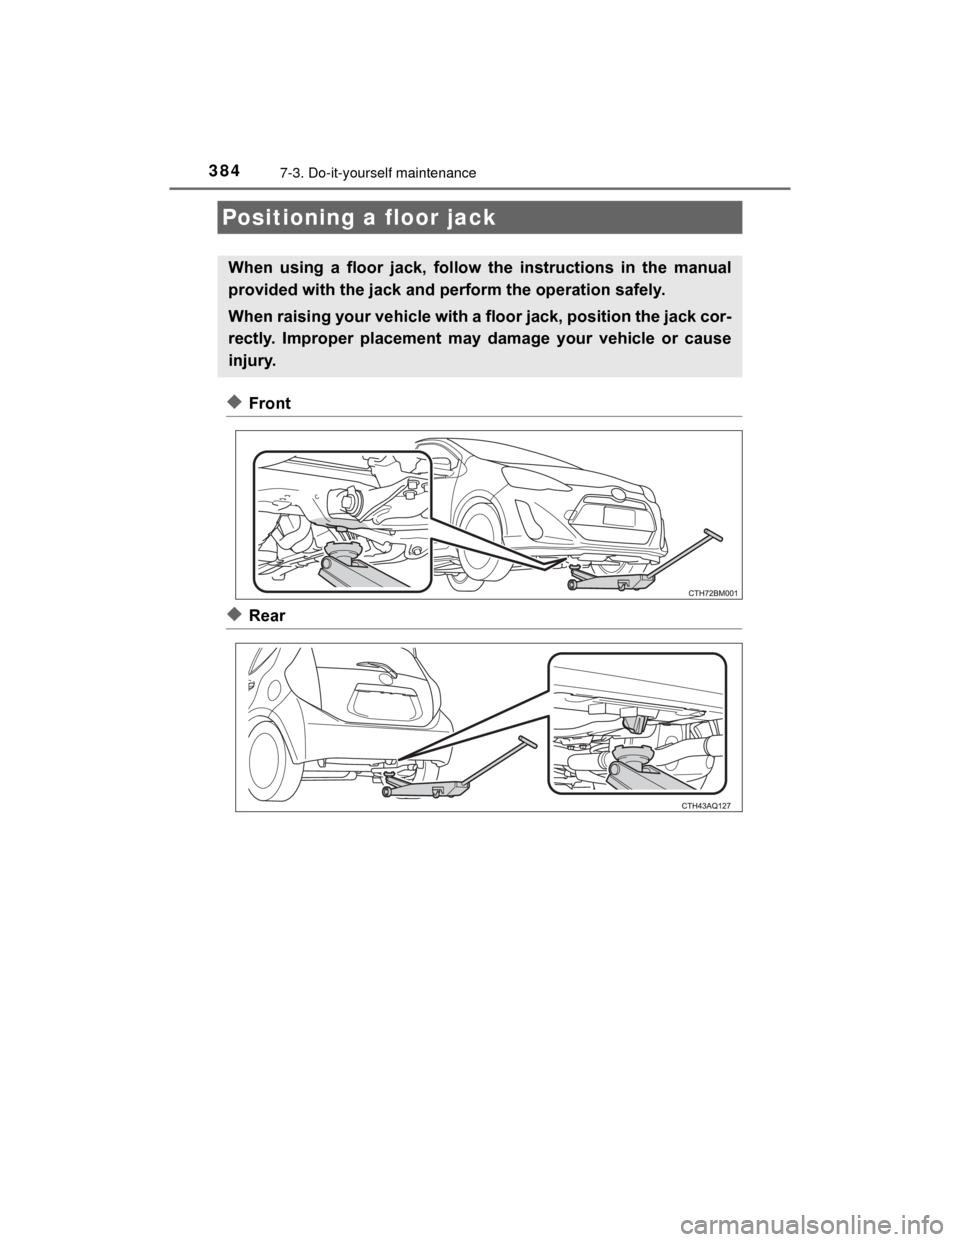 TOYOTA PRIUS C 2015 NHP10 / 1.G Owners Manual 3847-3. Do-it-yourself maintenance
PRIUS c_U (OM52E68U)
◆Front
◆Rear
Positioning a floor jack
When  using  a  floor  jack,  follow  the  instructions  in  the  manual
provided with the jack and pe